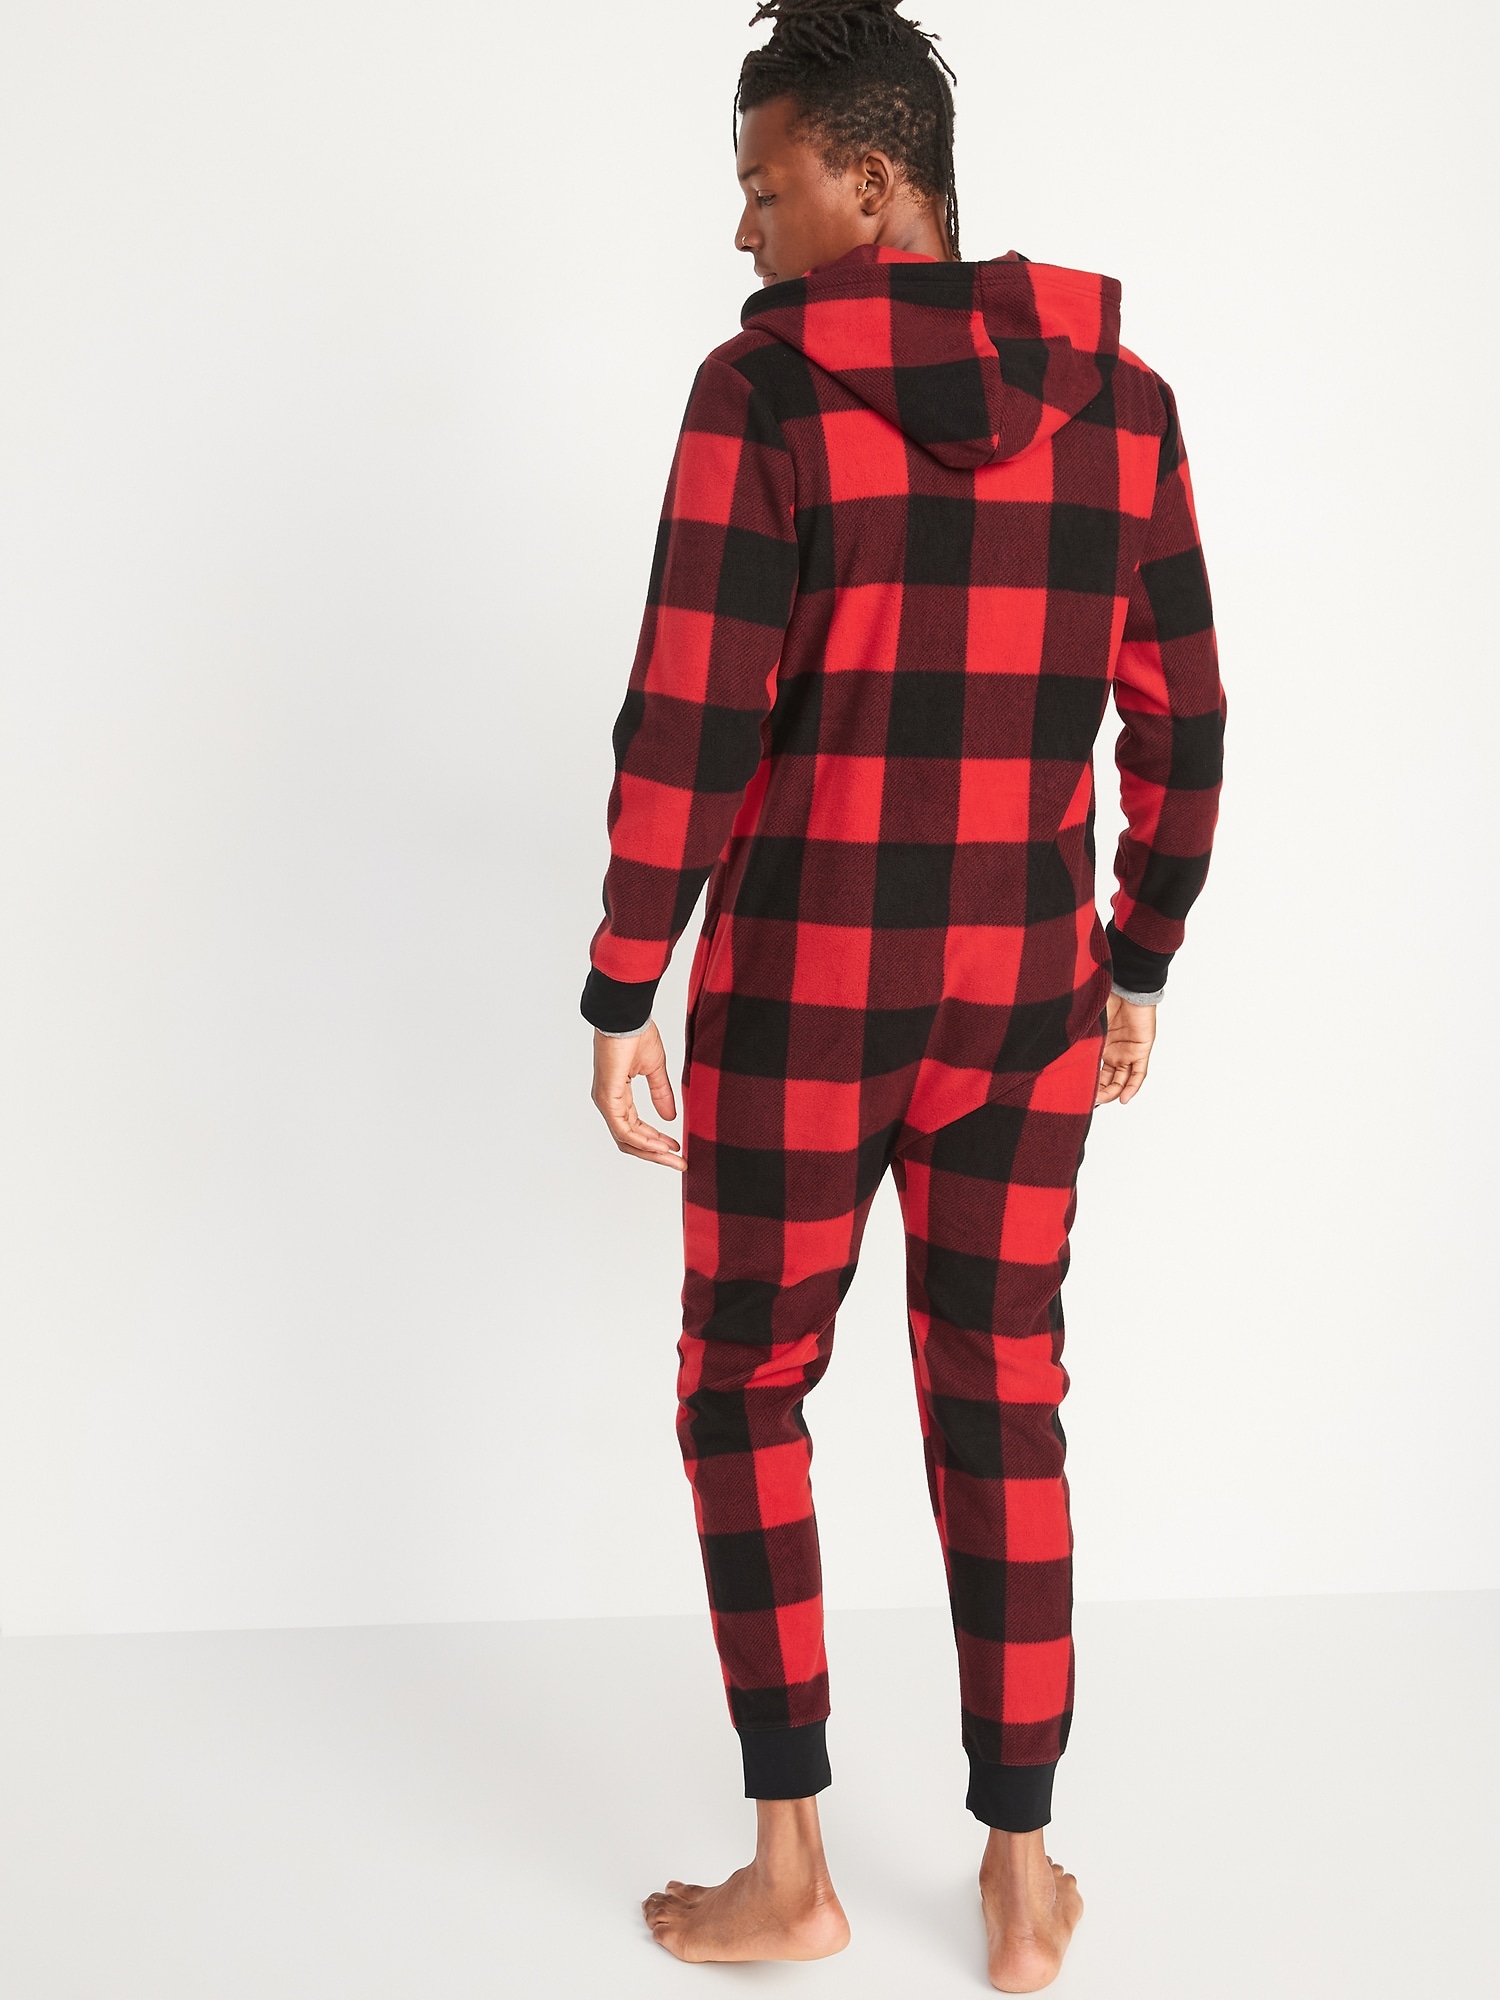 Matching Printed Microfleece Hooded One-Piece Pajamas for Men | Old Navy